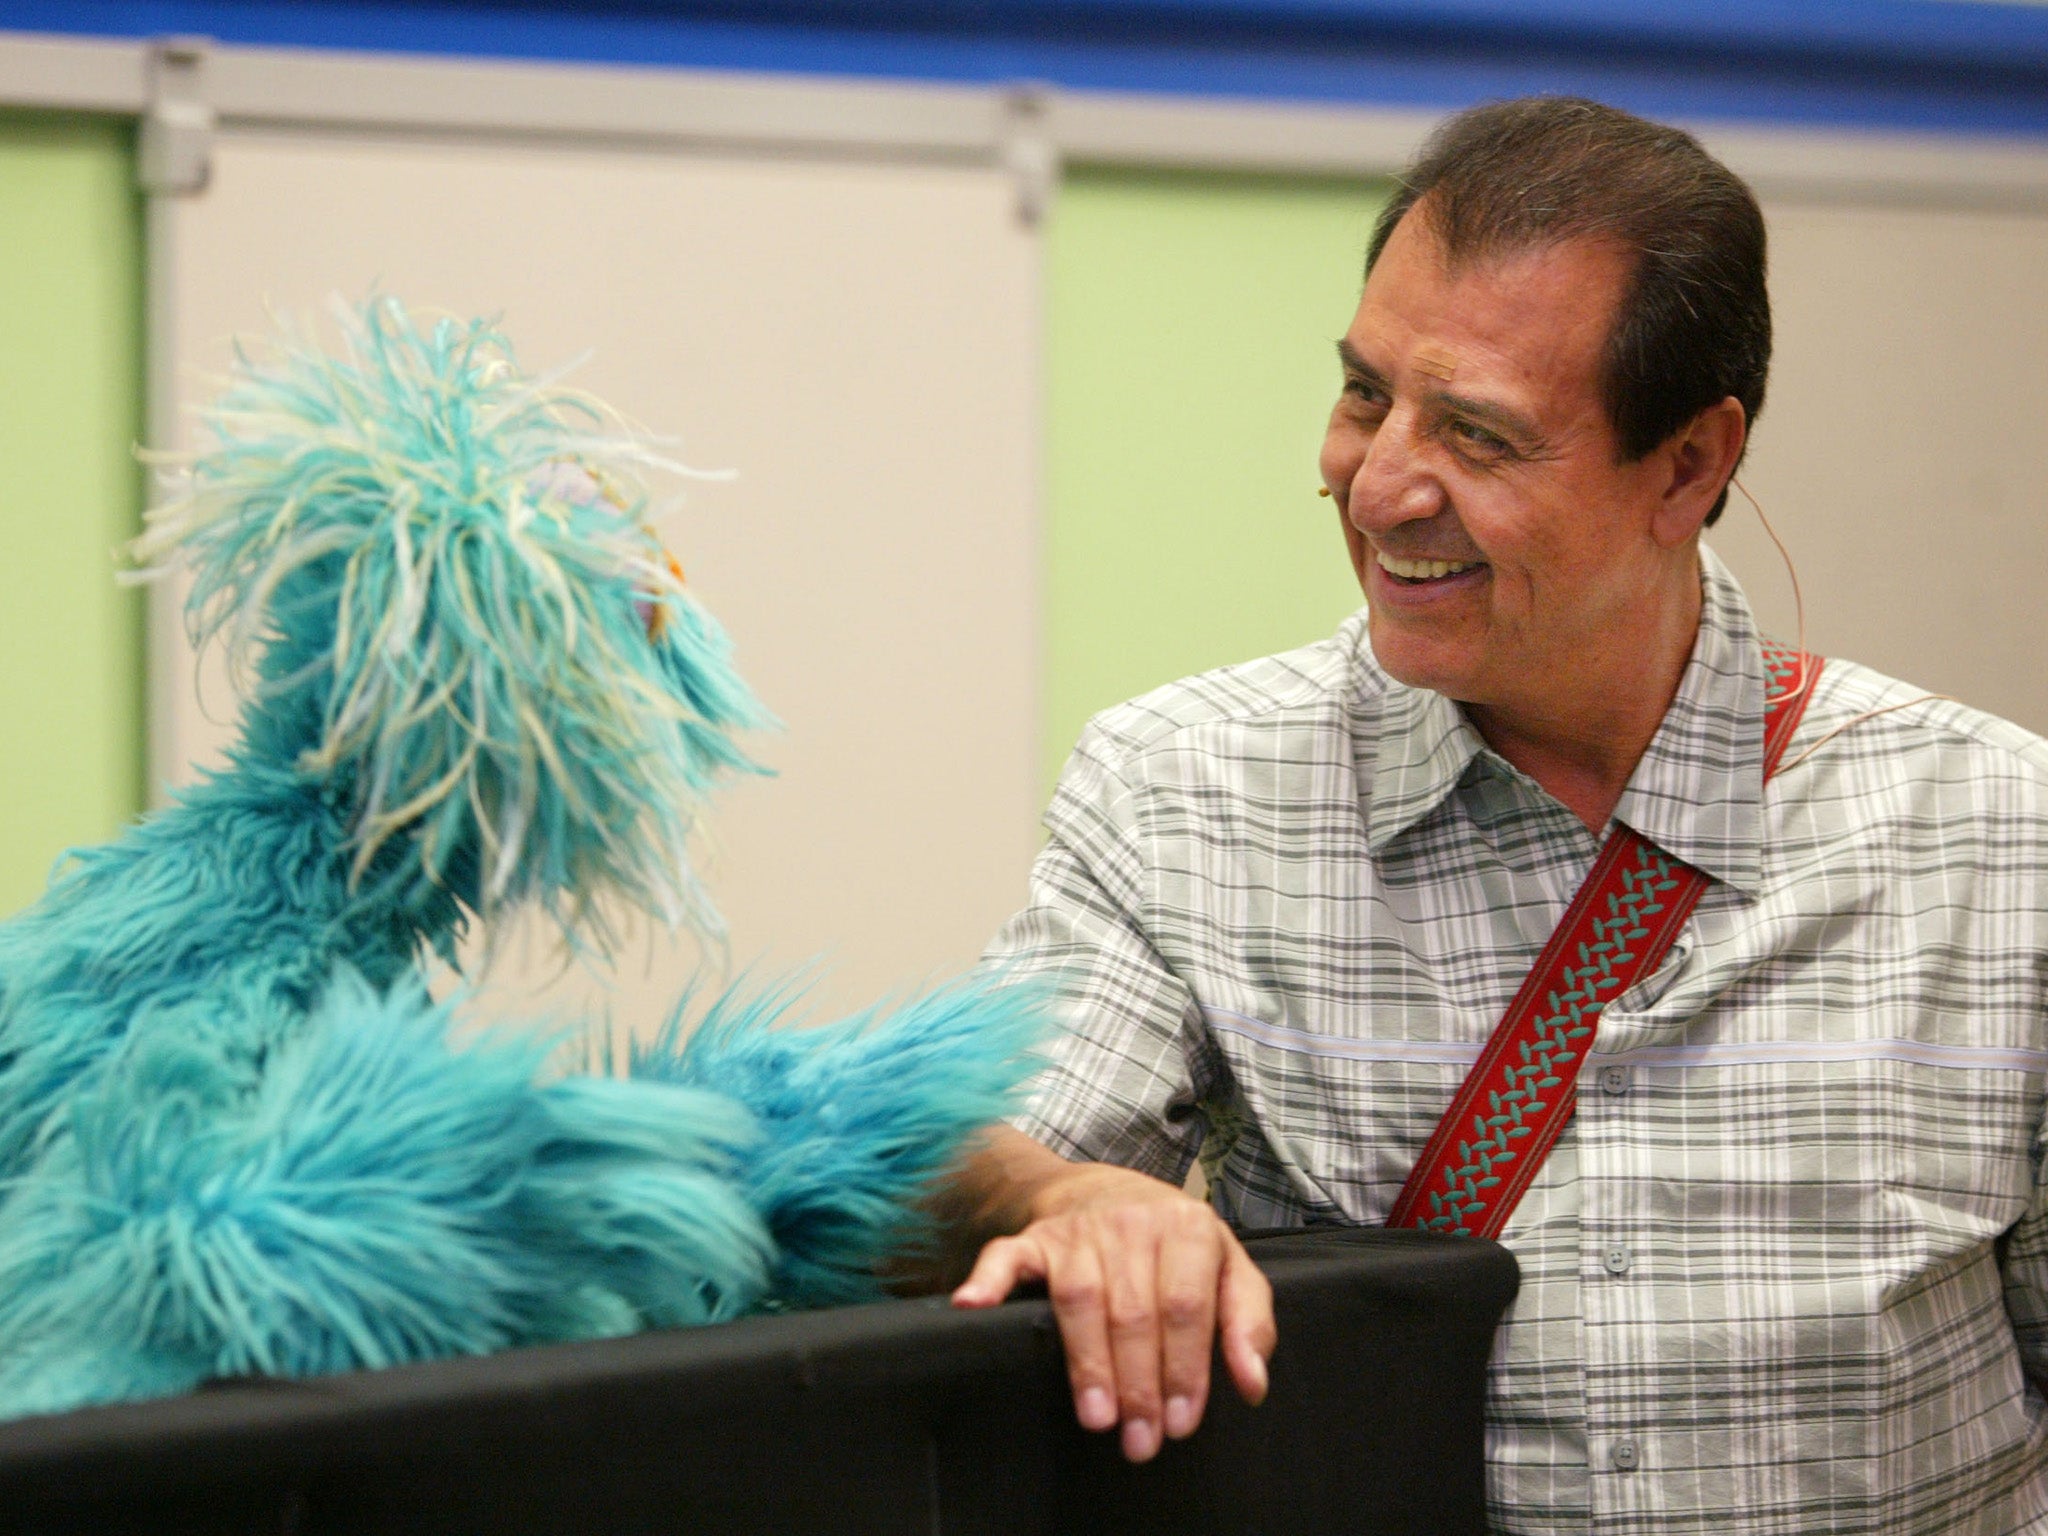 Luis and Rosita, a Muppet, chat during the introduction of the ‘You Can Ask!’ programme in 2003